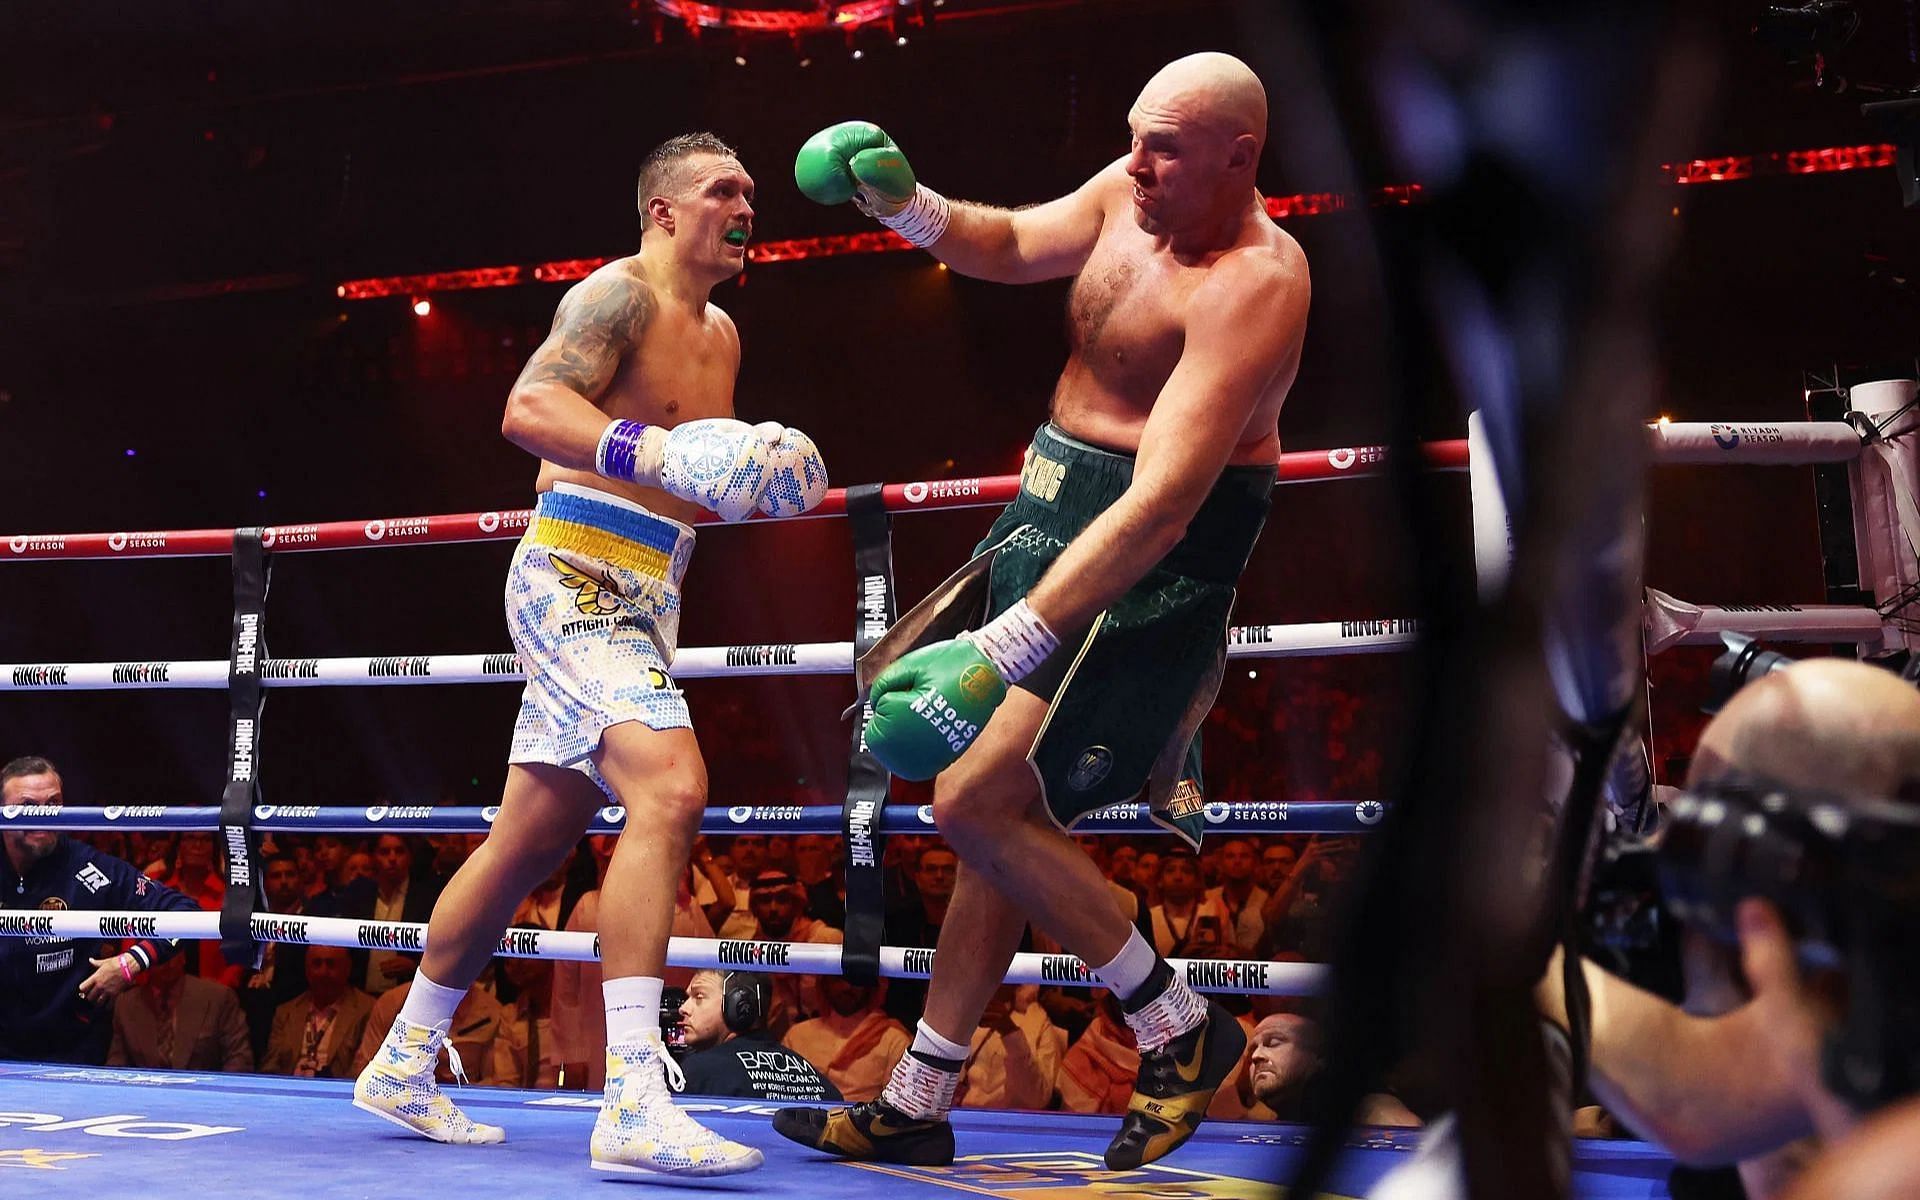 Oleksandr Usyk (left) wobbles Tyson Fury (right) in Round 9 of their clash before the referee steps in [Image Courtesy: @GettyImages]